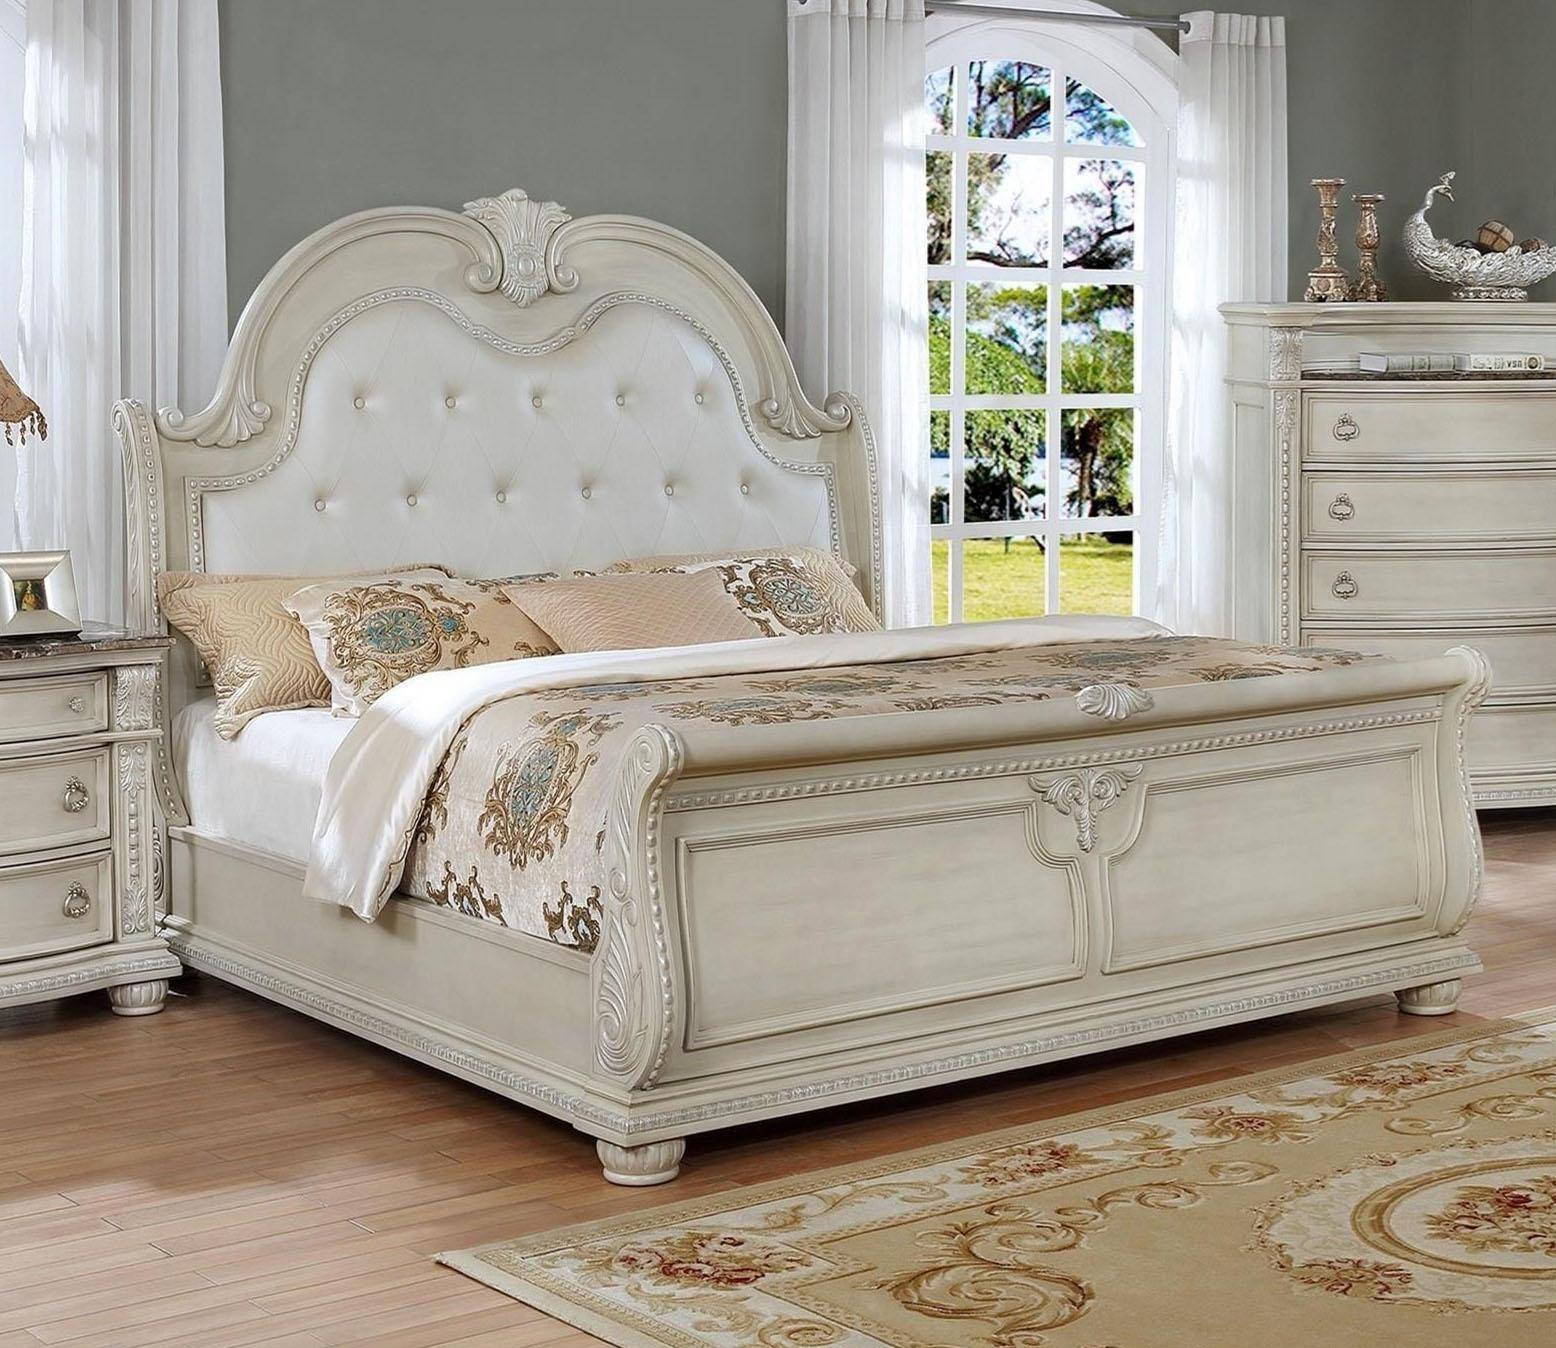 White and Silver Bedroom Set Best Of Crown Mark B1630 Stanley Antique White solid Wood Queen